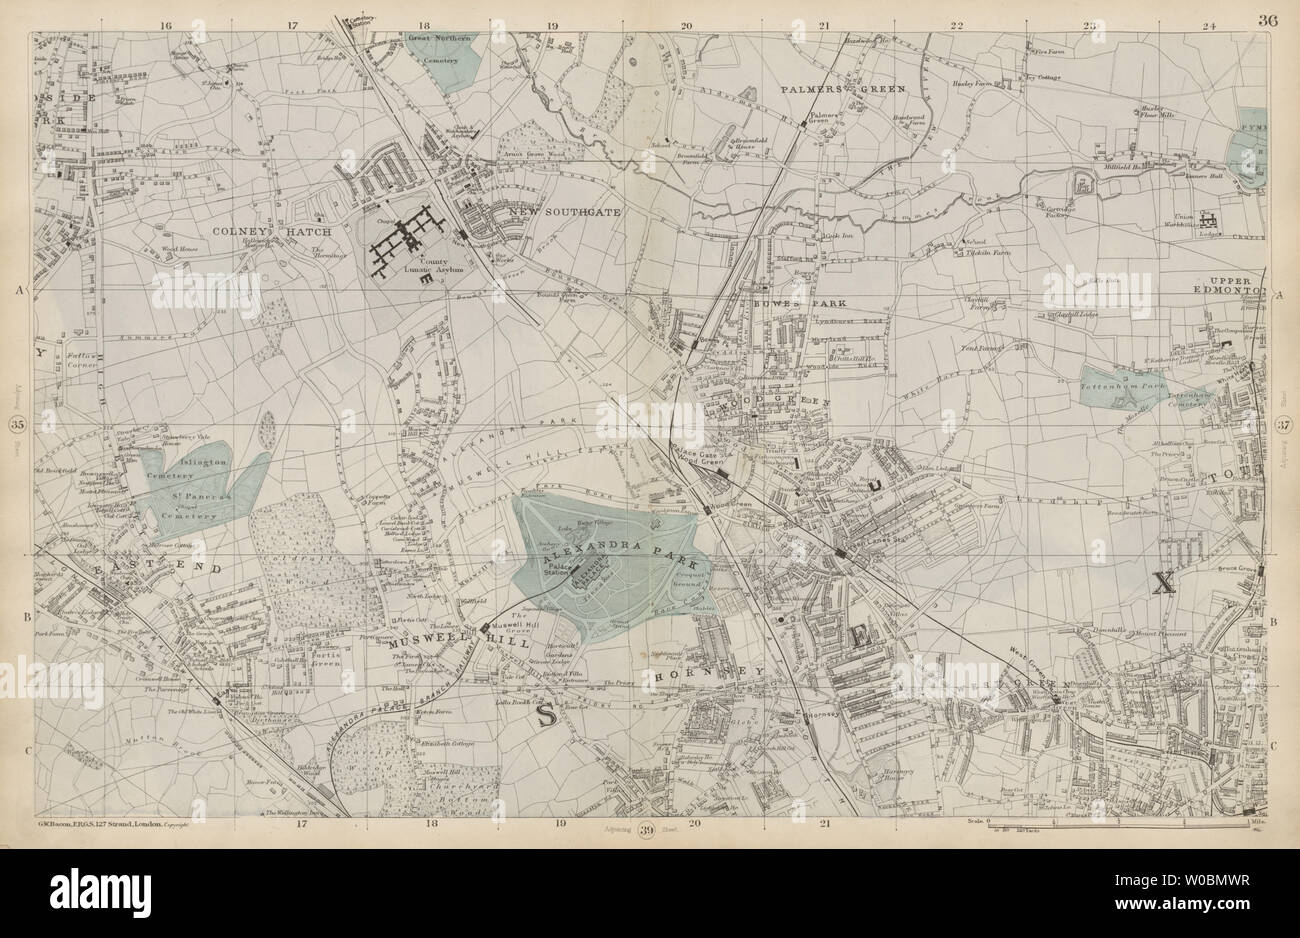 FRIERN BARNET/HORNSEY Palmers/Wood Green Southgate Muswell Hill BACON c1887 mappa Foto Stock